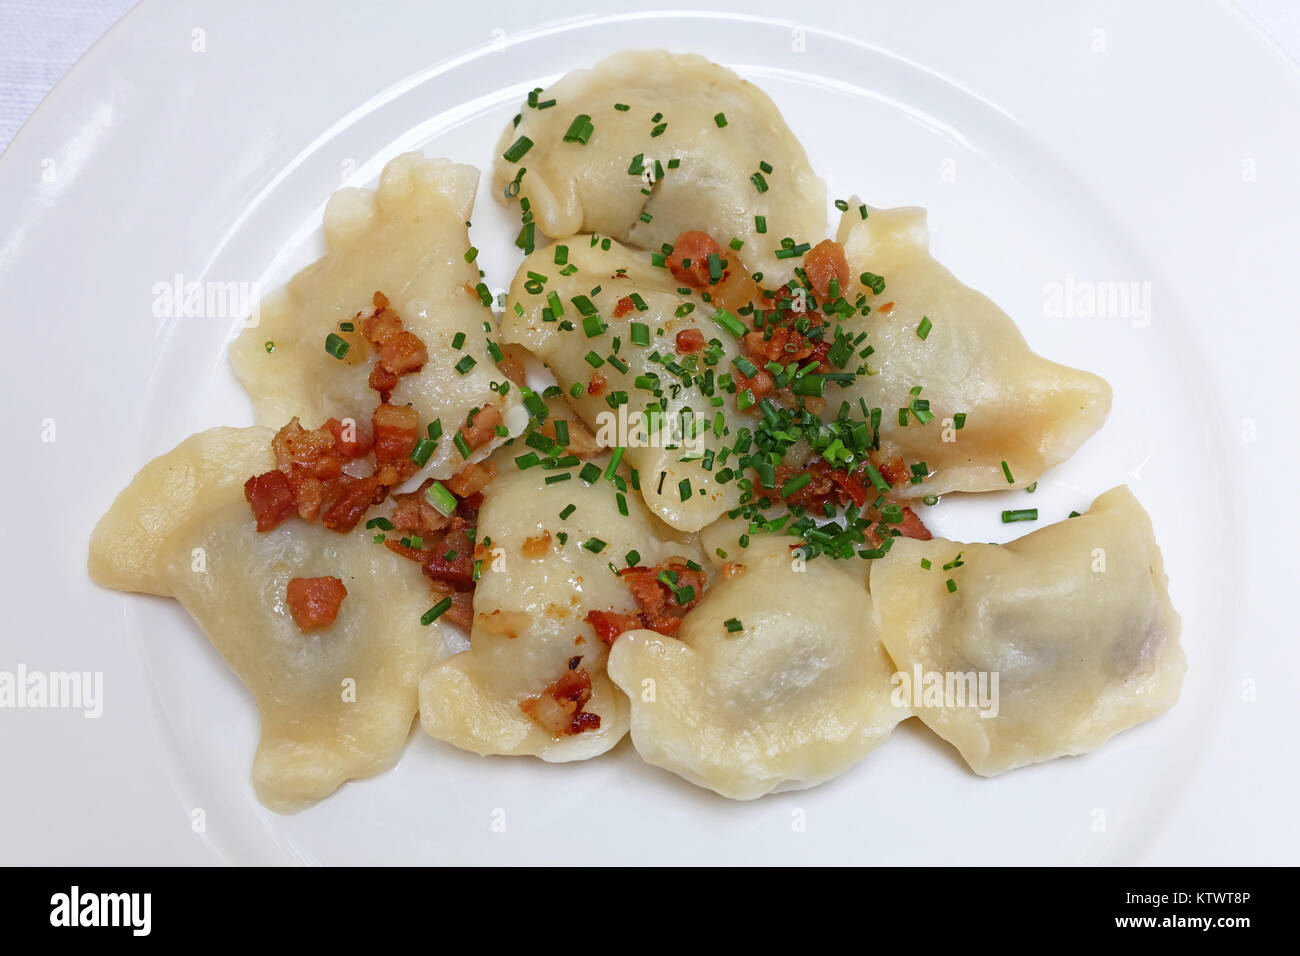 Plate of pierogi or varenyky stuffed filled dumplings with bacon crisps and green chive onion, traditional East Europe cuisine meal popular in Poland, Stock Photo